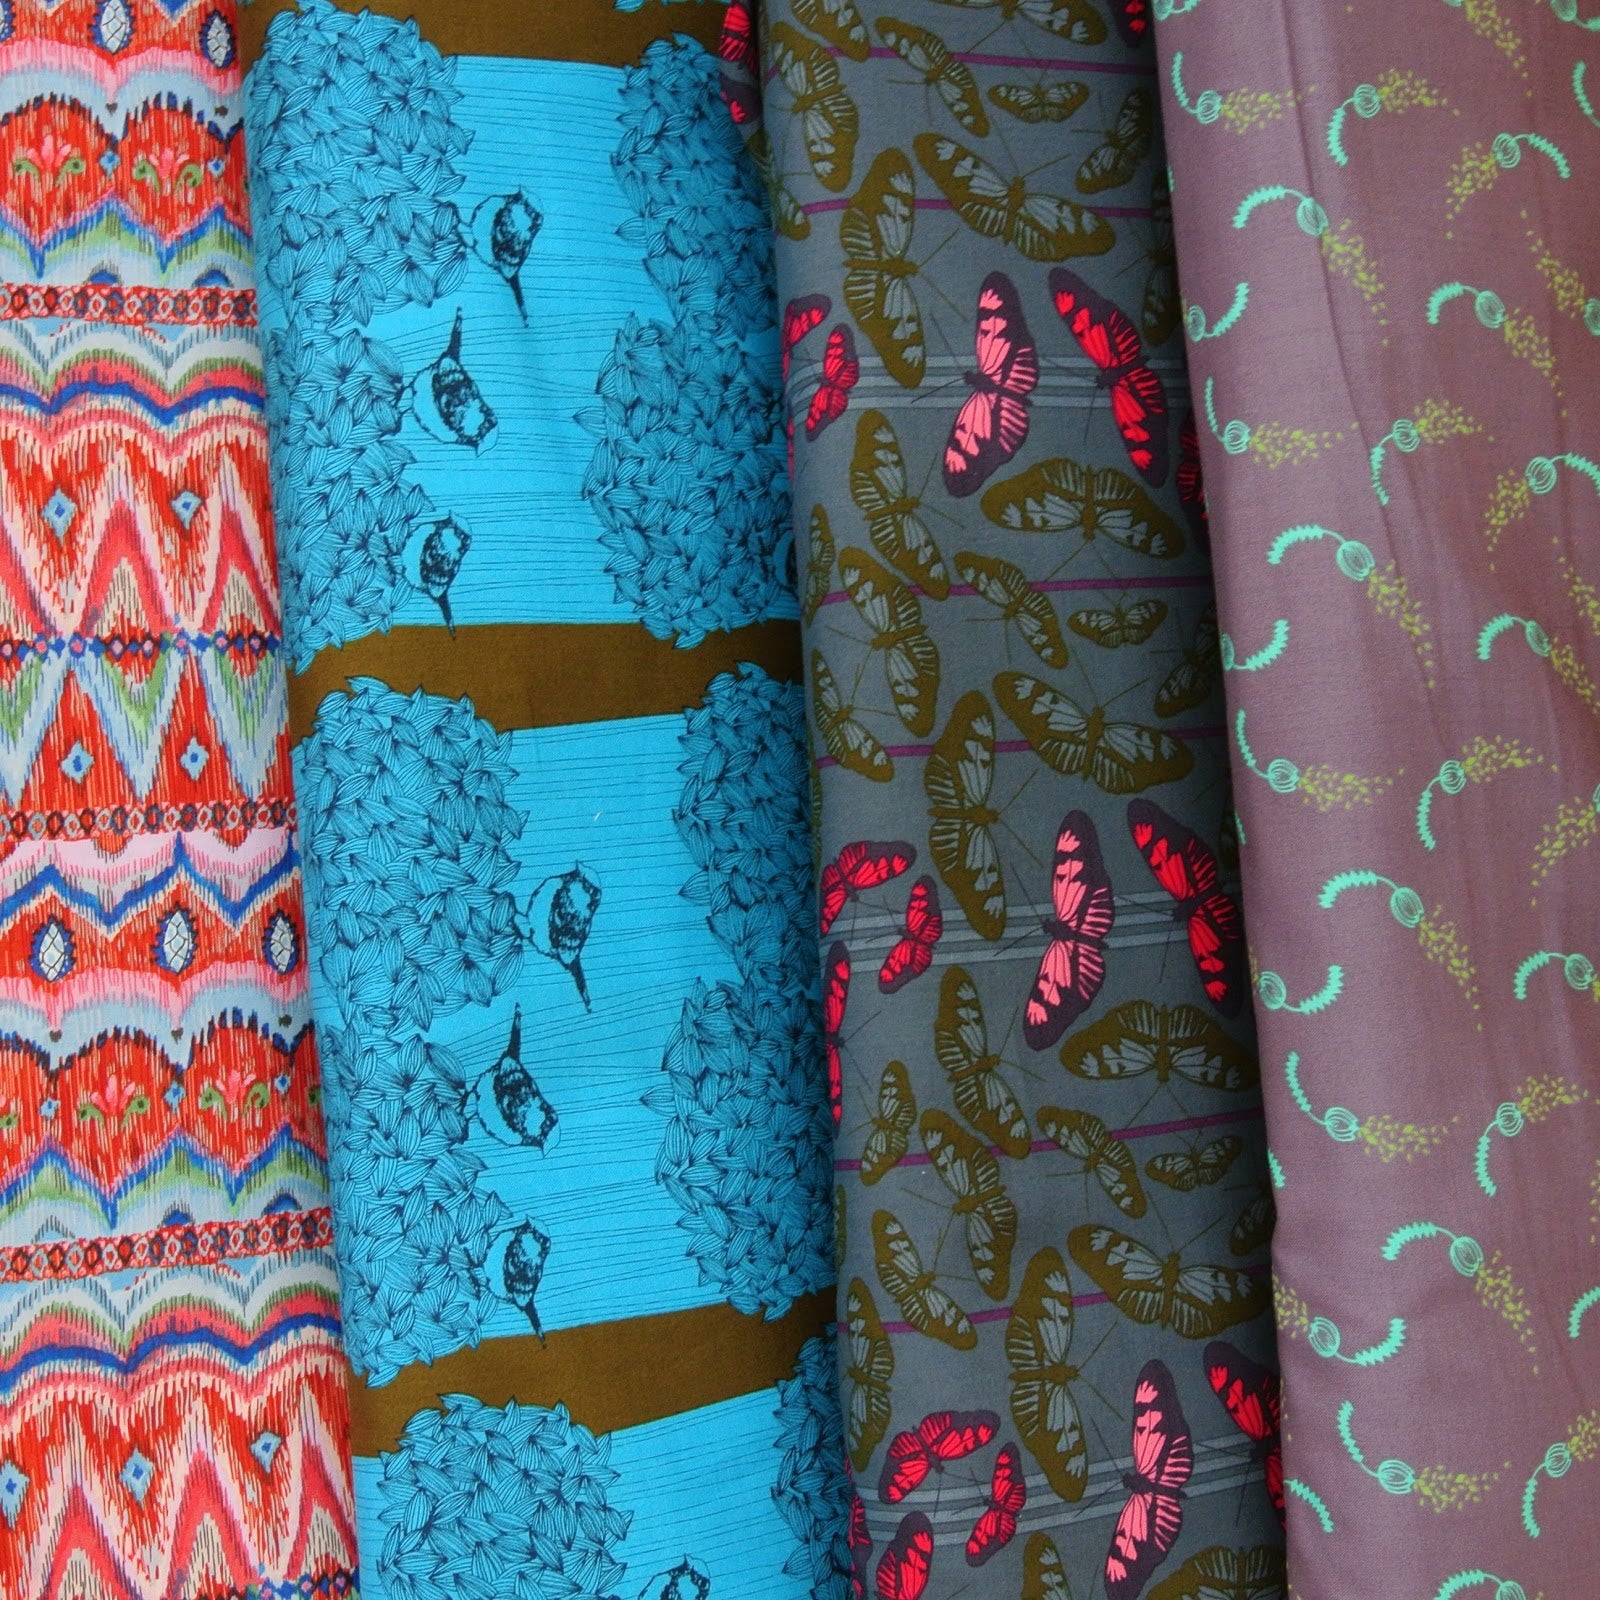 A Beginner's Guide to Fabrics: Choosing The Right Fabric!